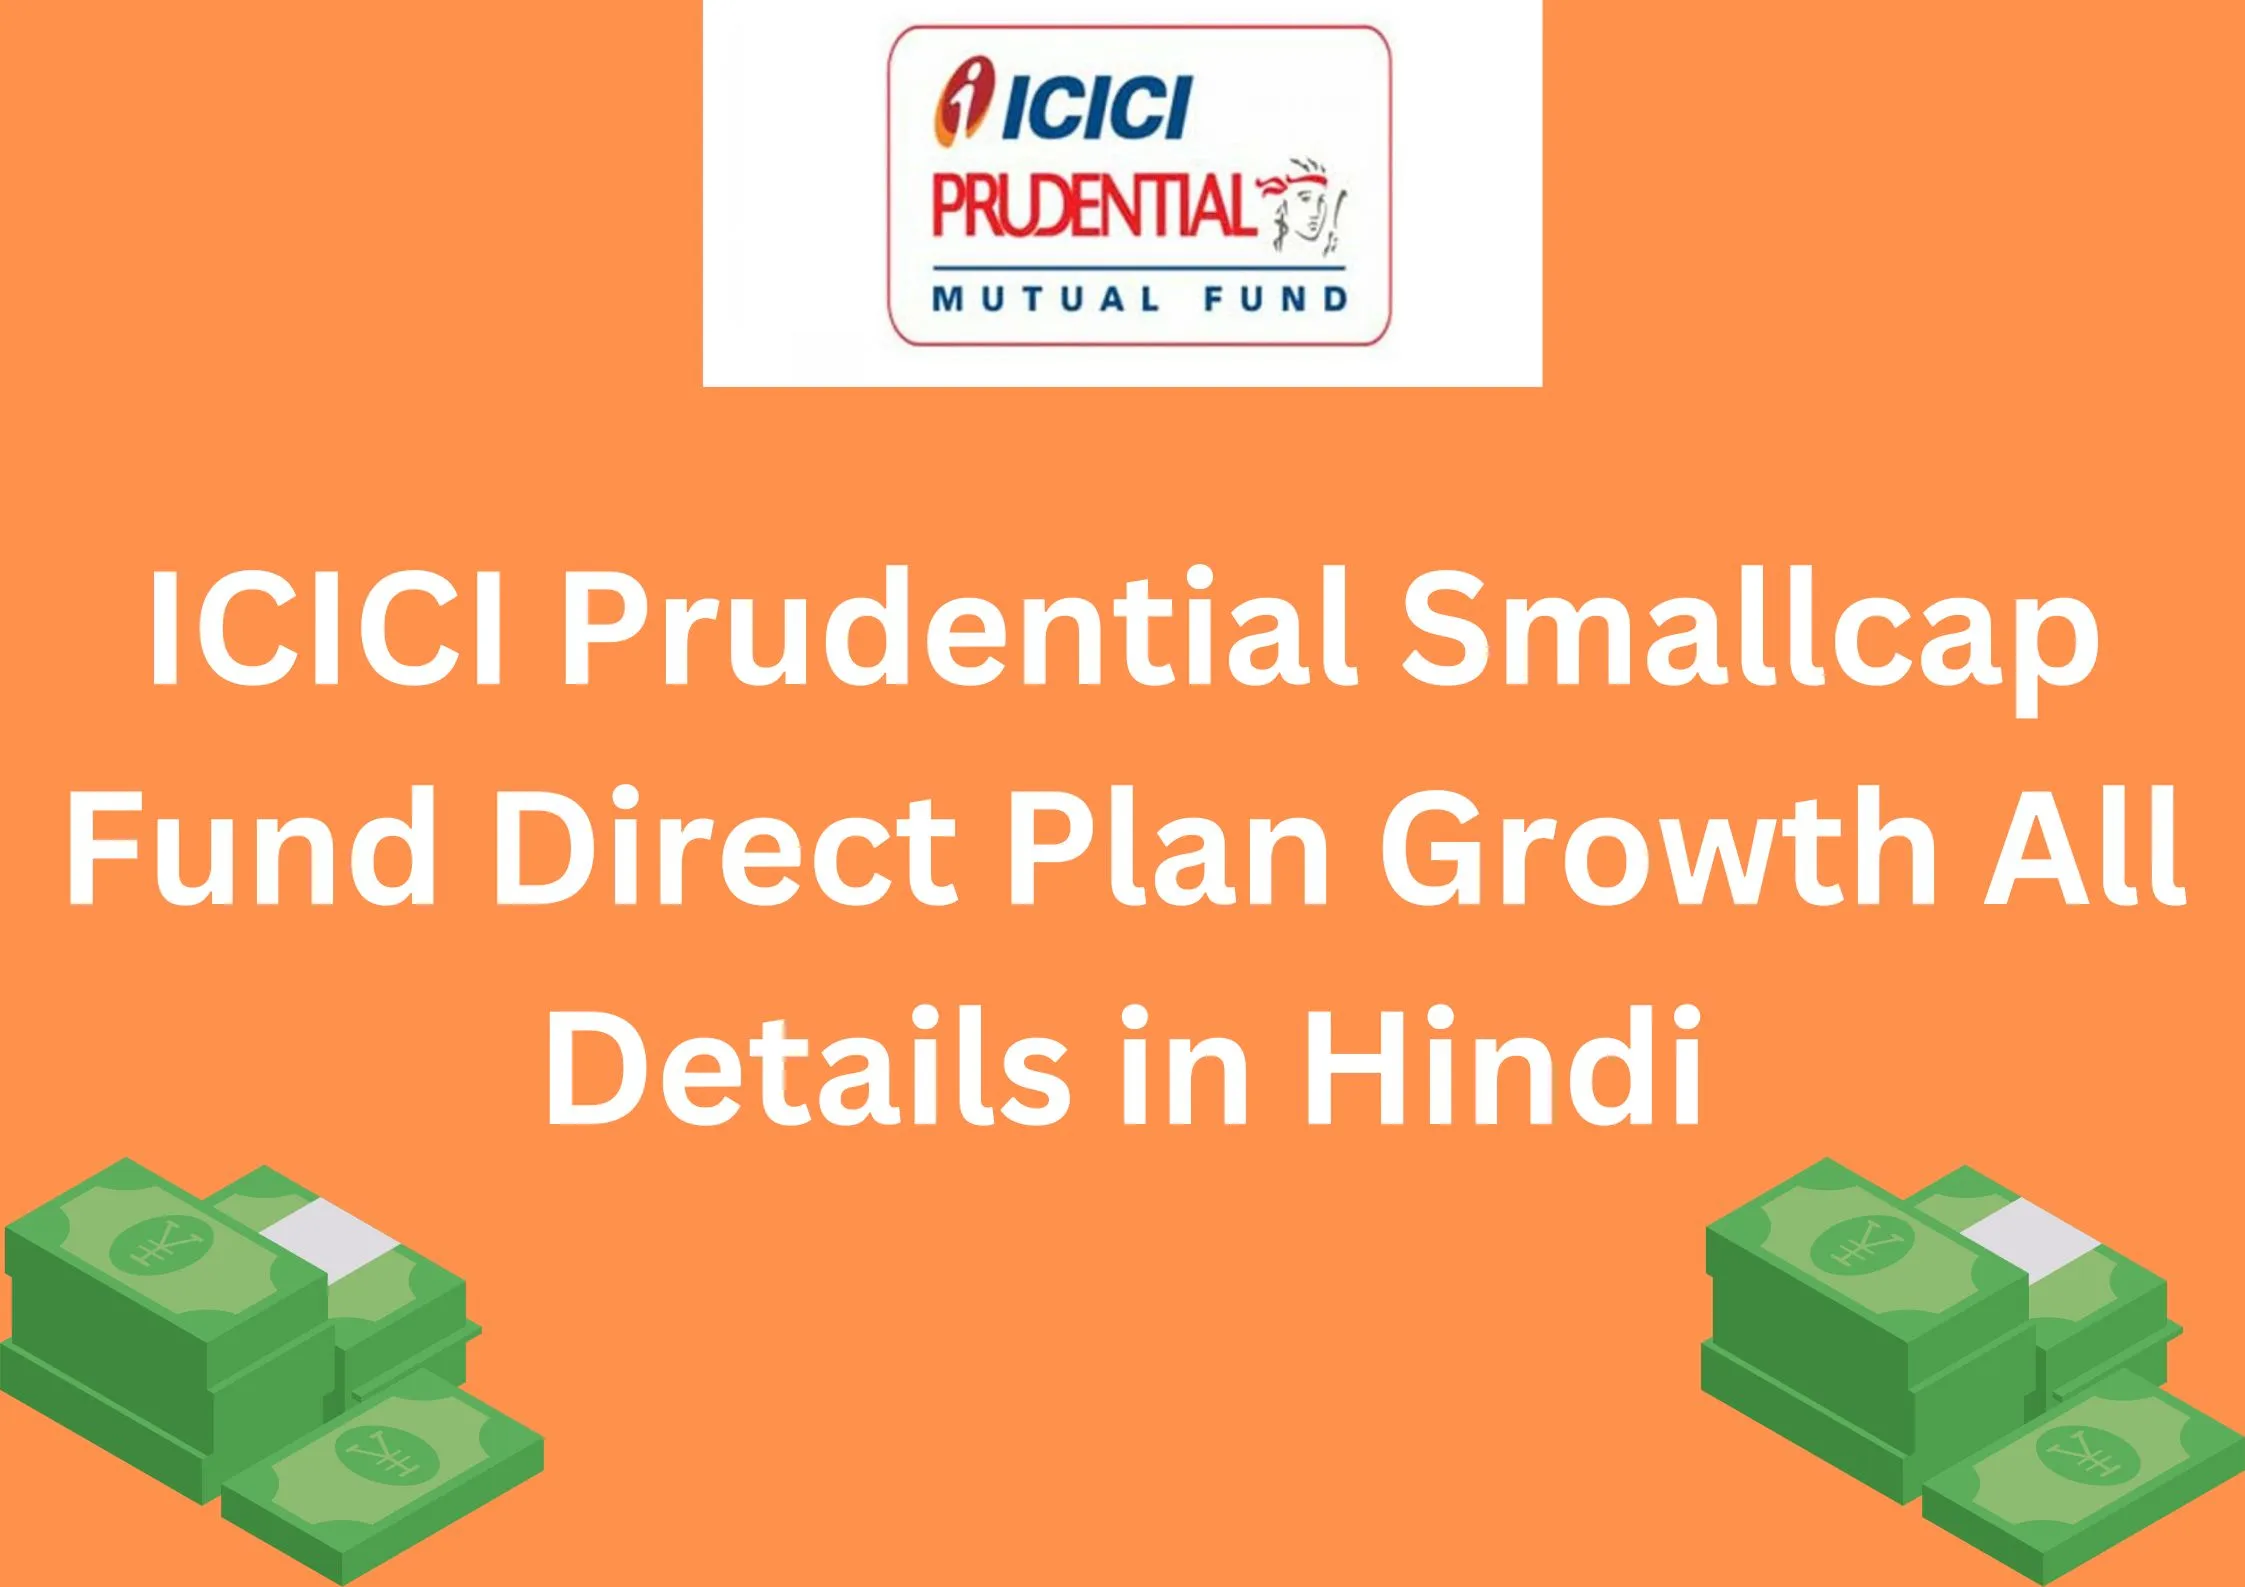 ICICI Prudential Smallcap Fund Direct Plan Growth